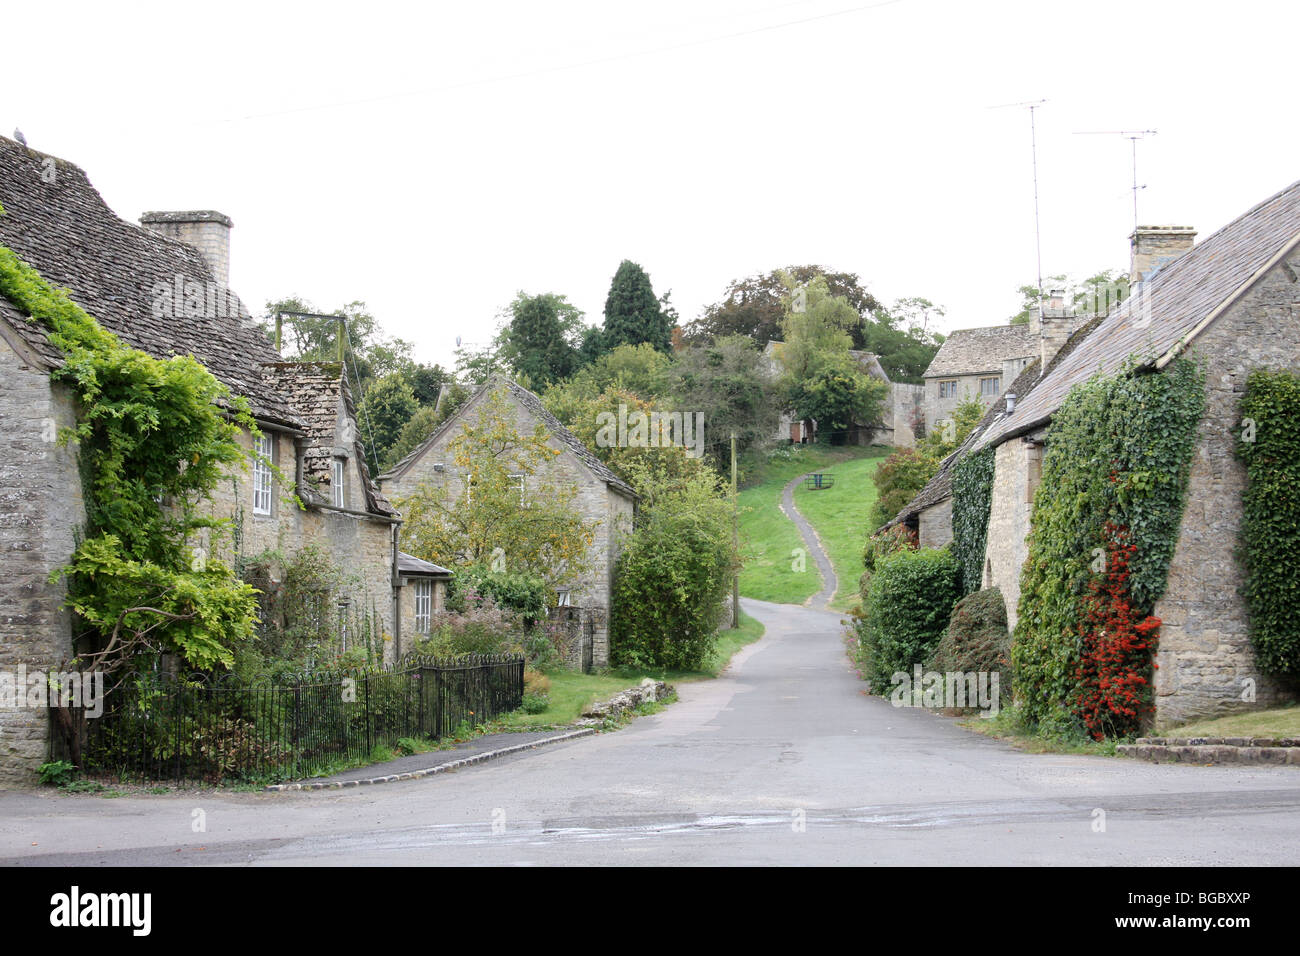 The picturesque Cotswold village of Shilton in Oxfordshire UK. Stock Photo